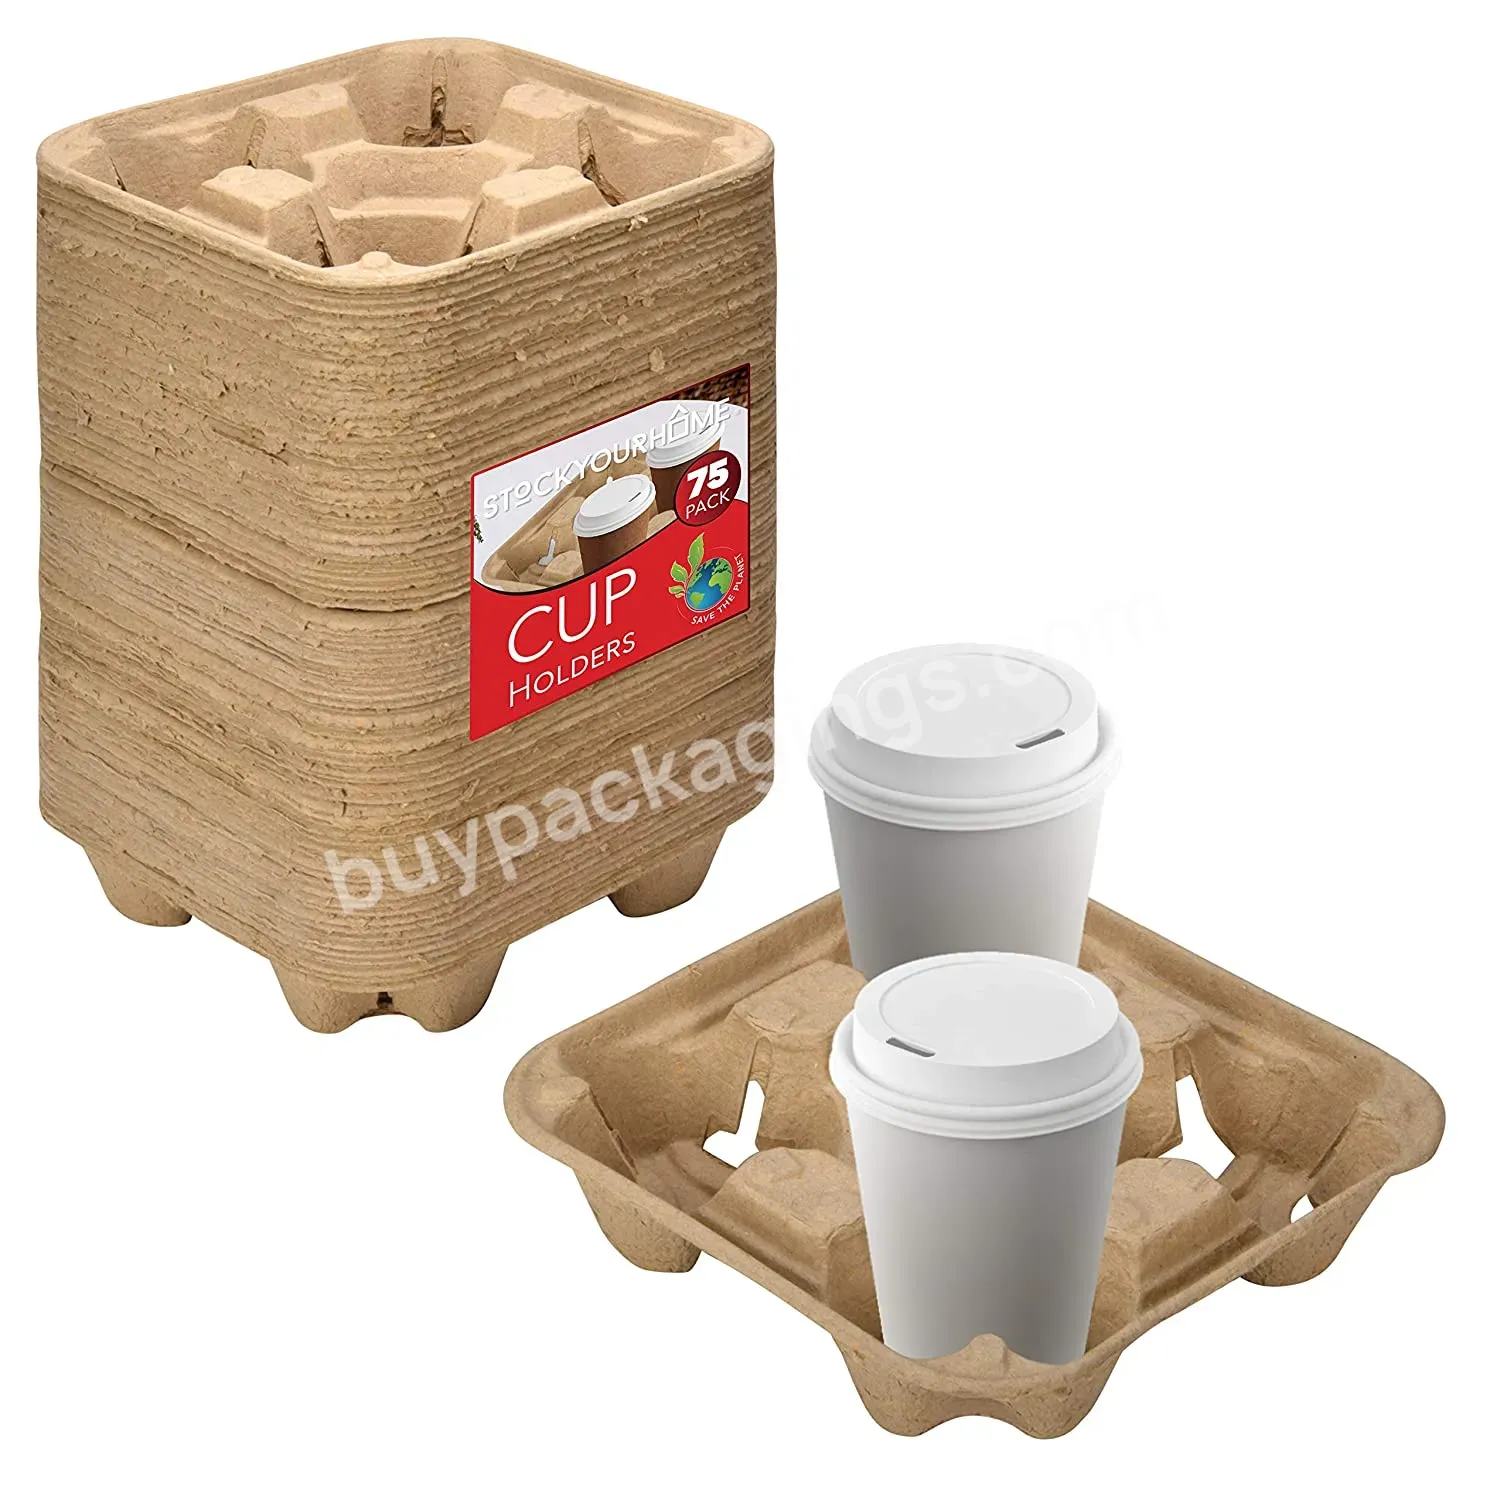 4 Cup Disposable Coffee Tray Biodegradable Cup Carrier Durable Drink Carrier For Hot Or Cold Drink Can Be Customized